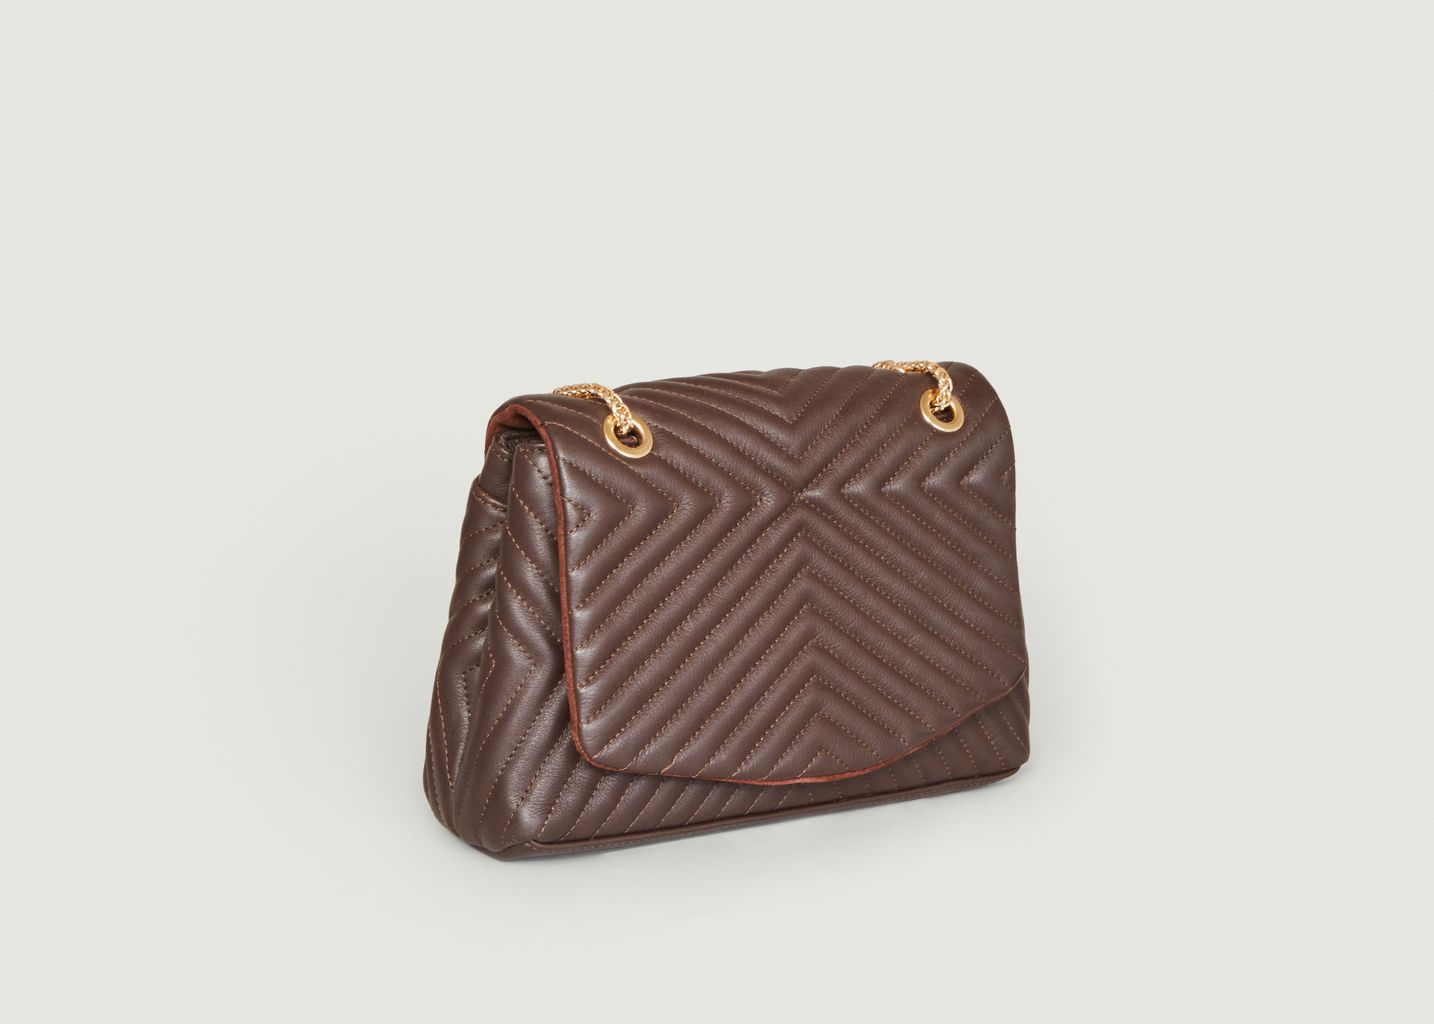 Yvonne quilted bag - Petite Mendigote